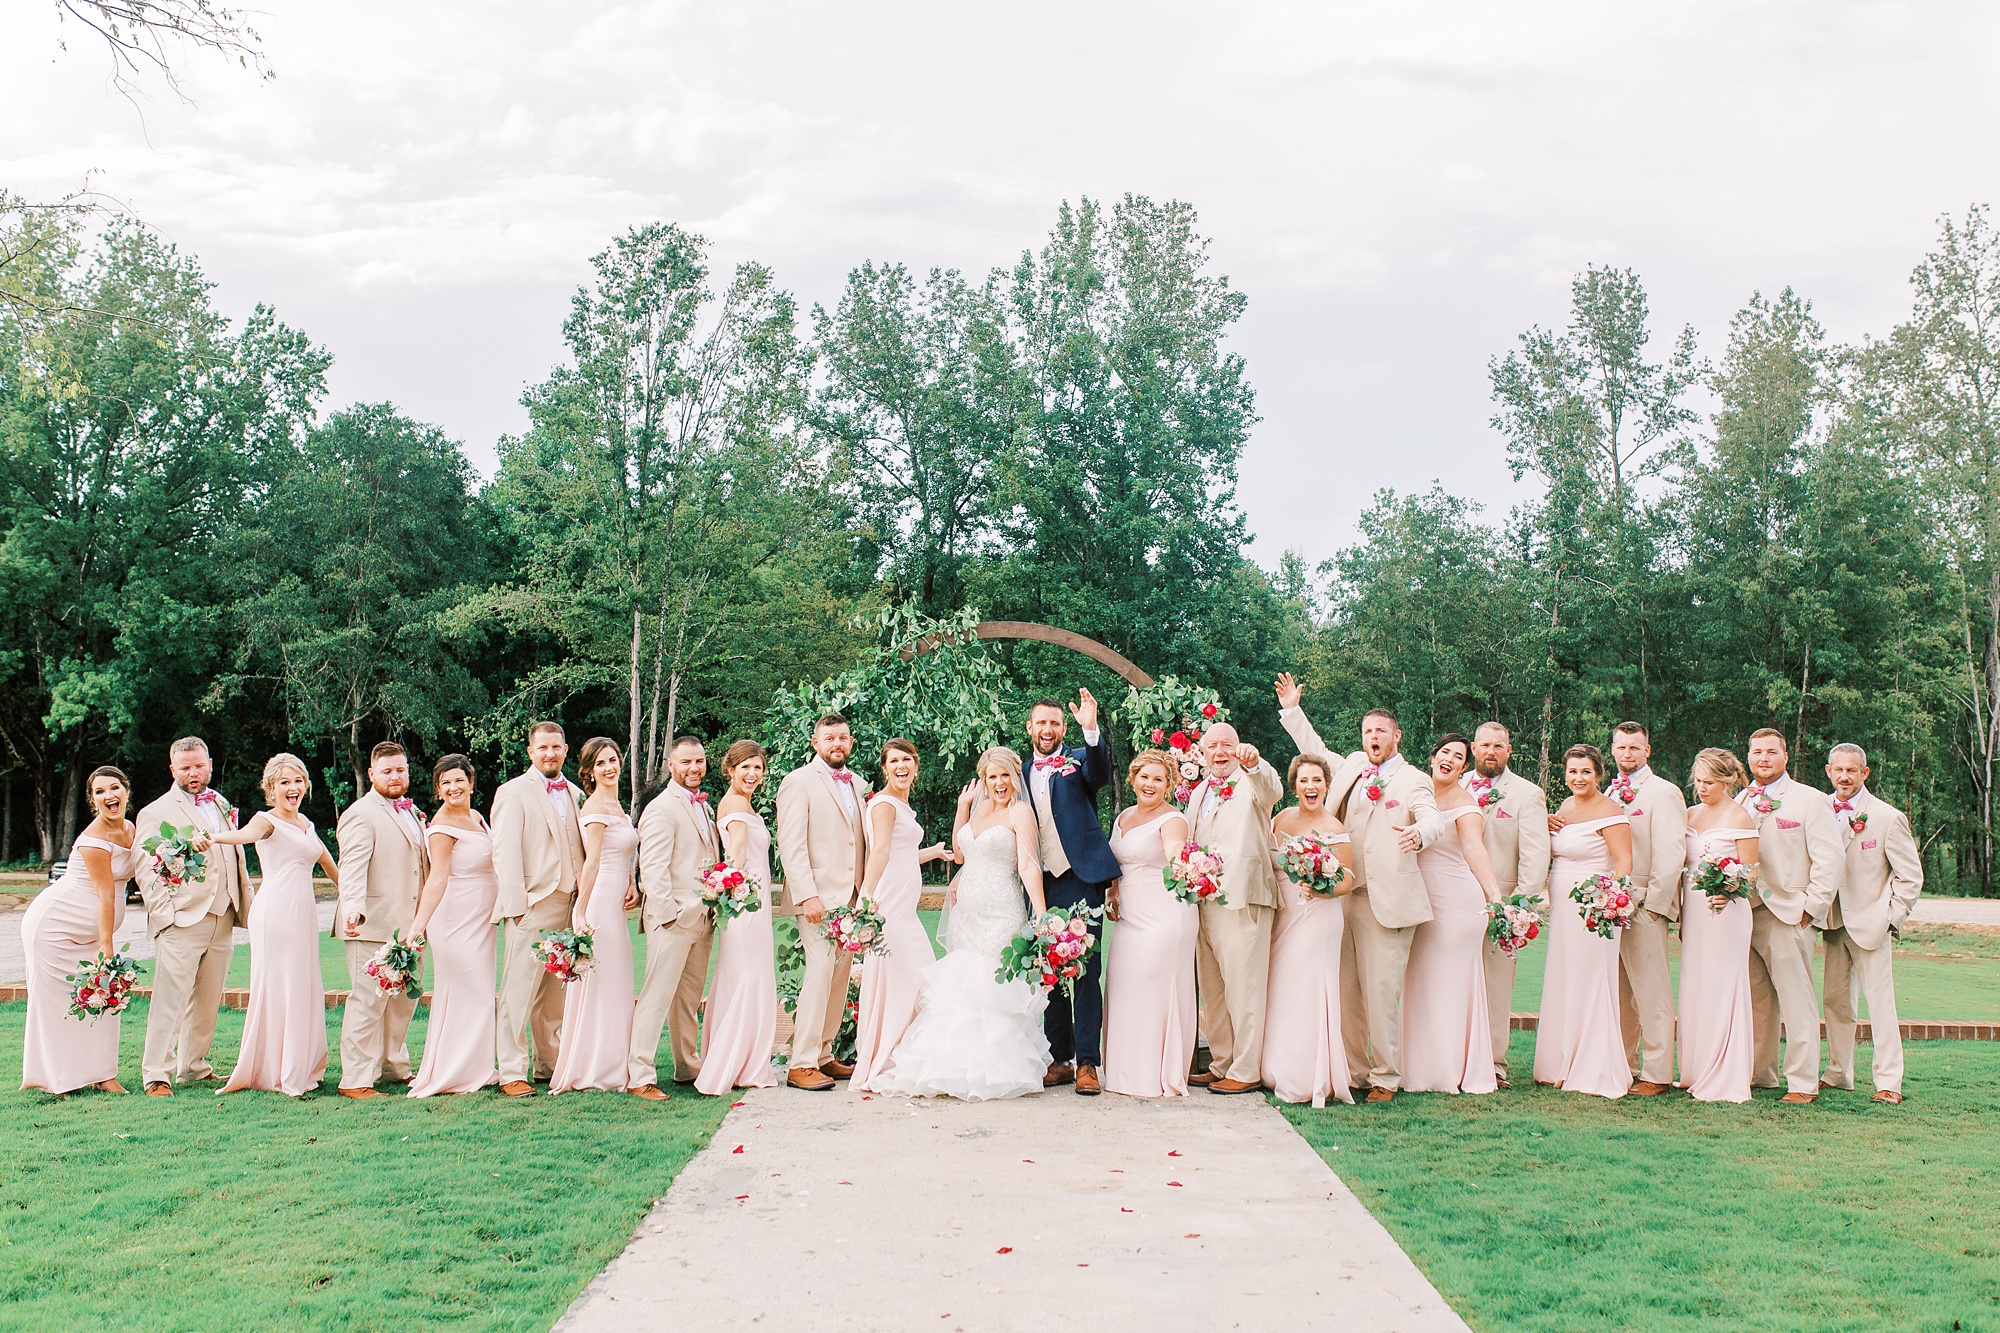 South Carolina wedding party poses with bride and groom